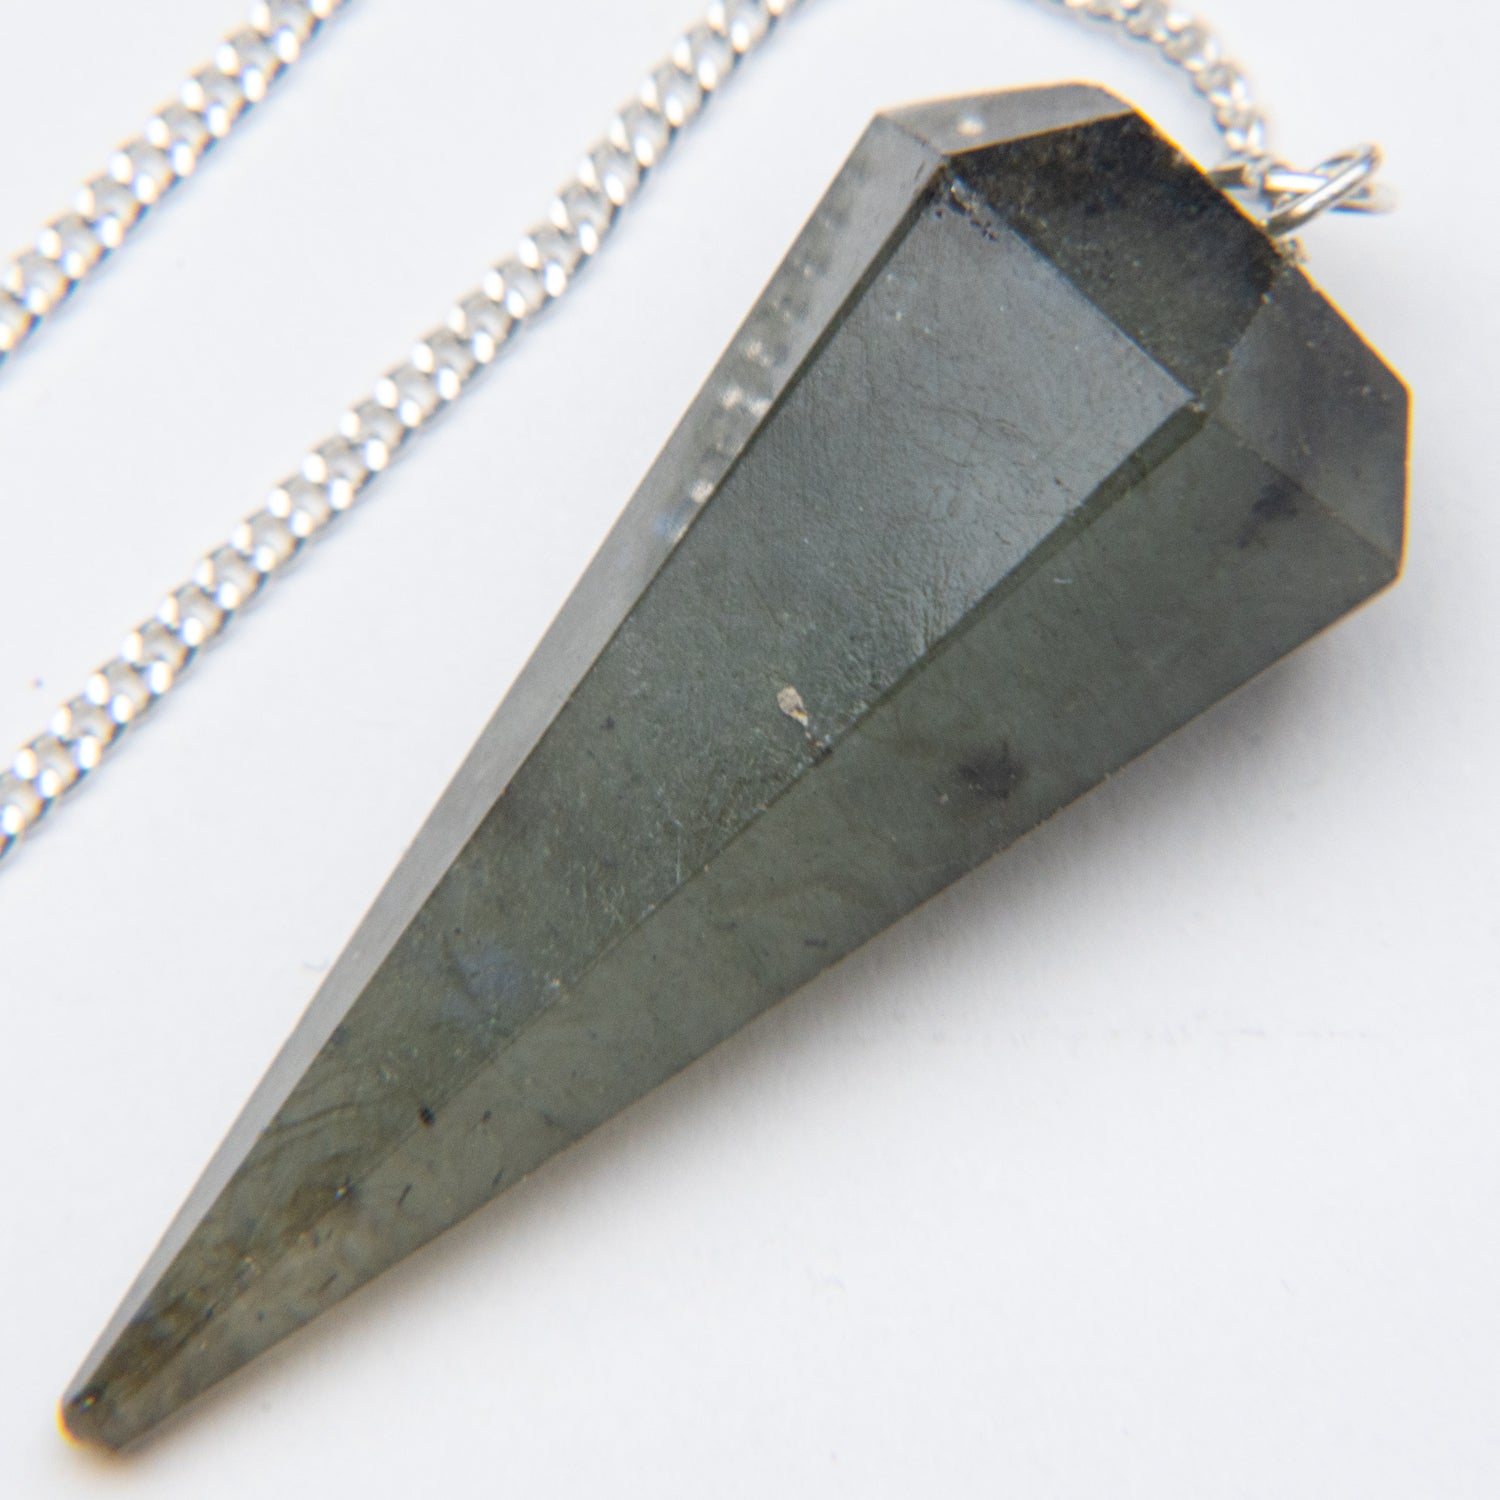 Genuine Polished Labradorite Pendulum (with Chain) with black velvet pouch